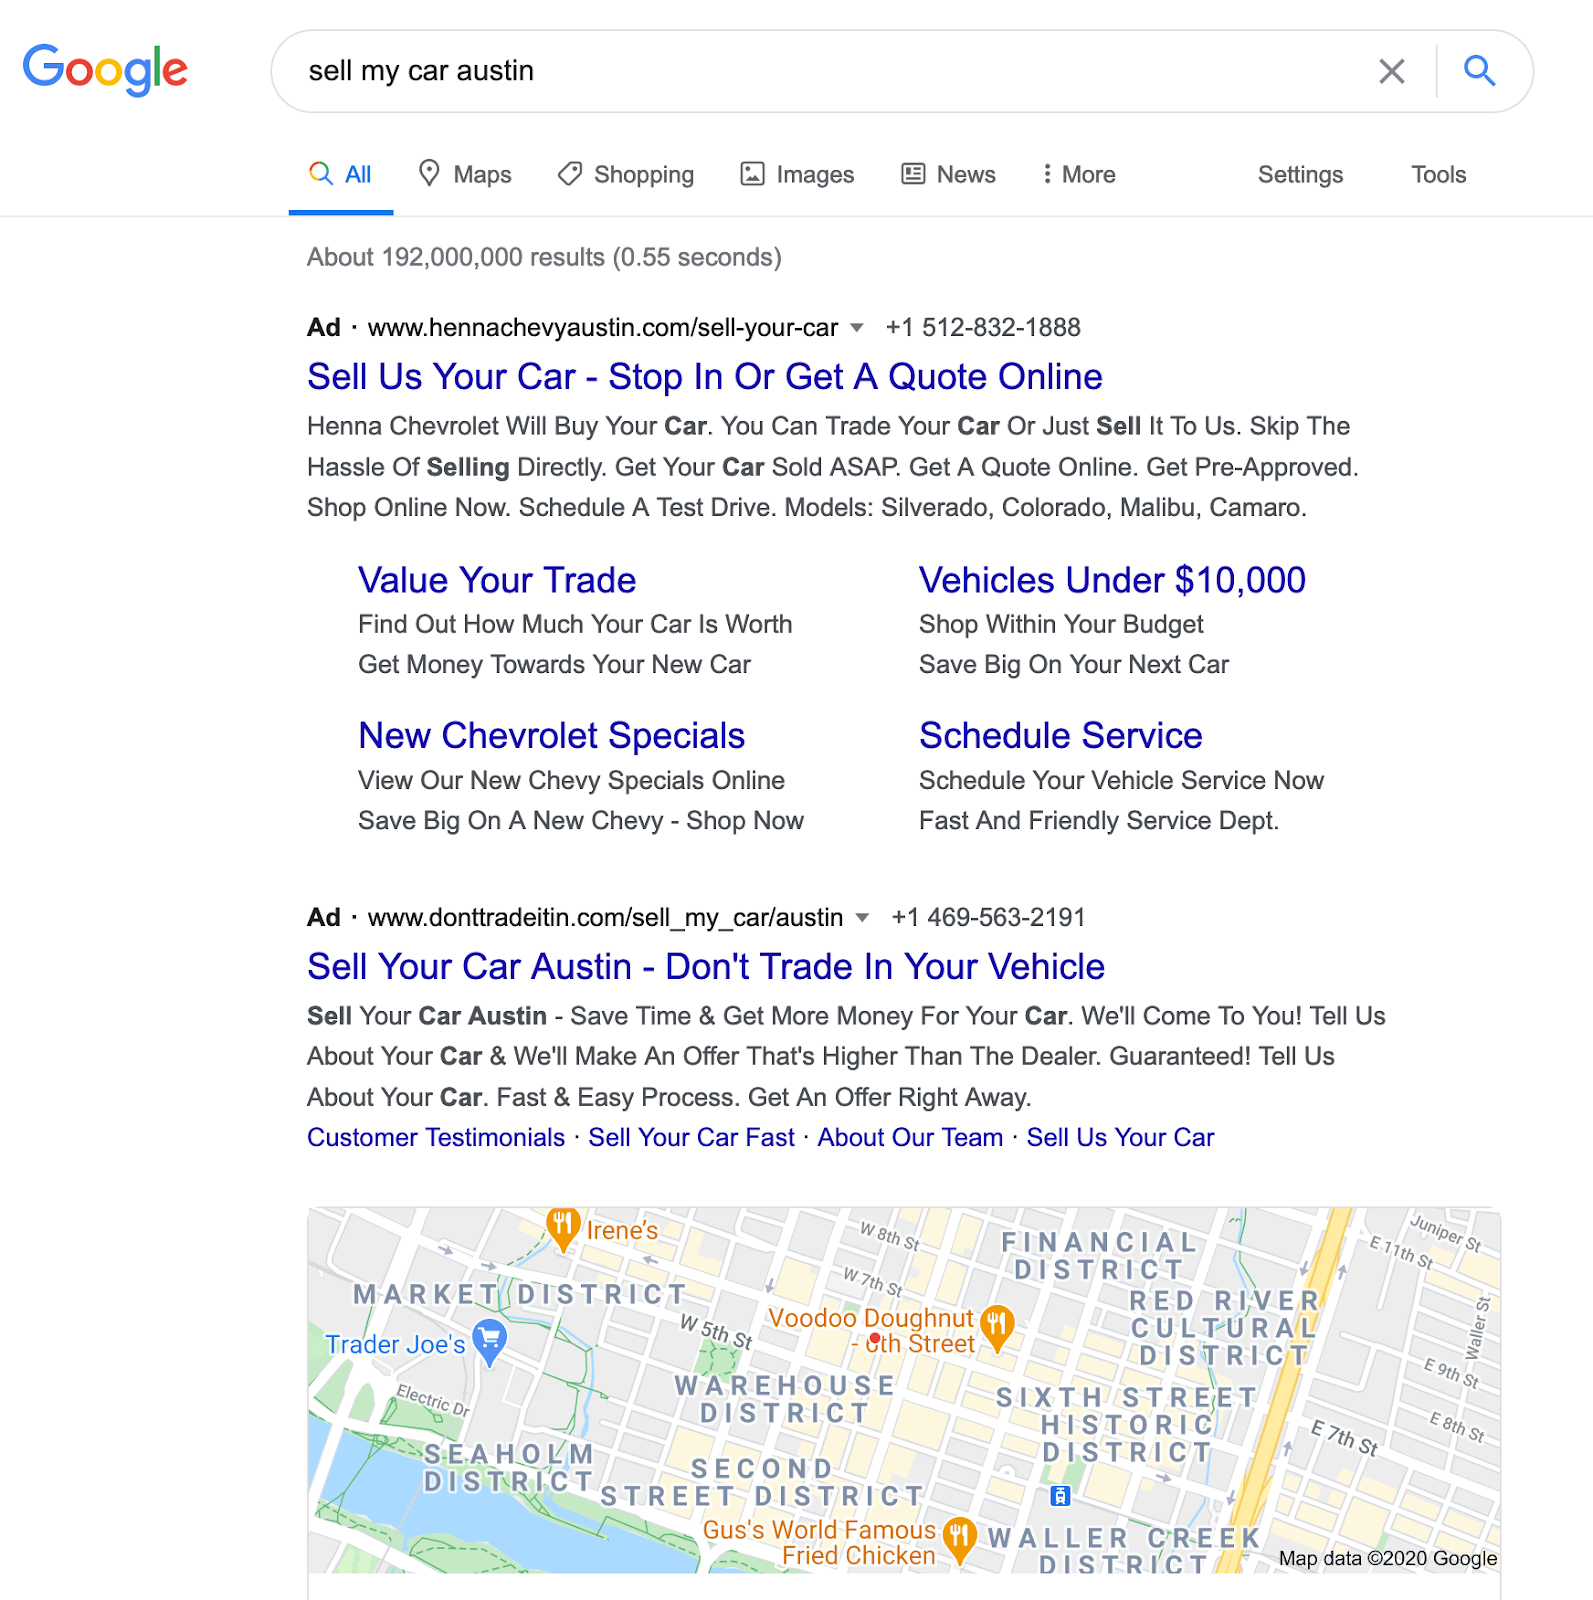 Results generated by Google search of ‘Sell my car Austin’.